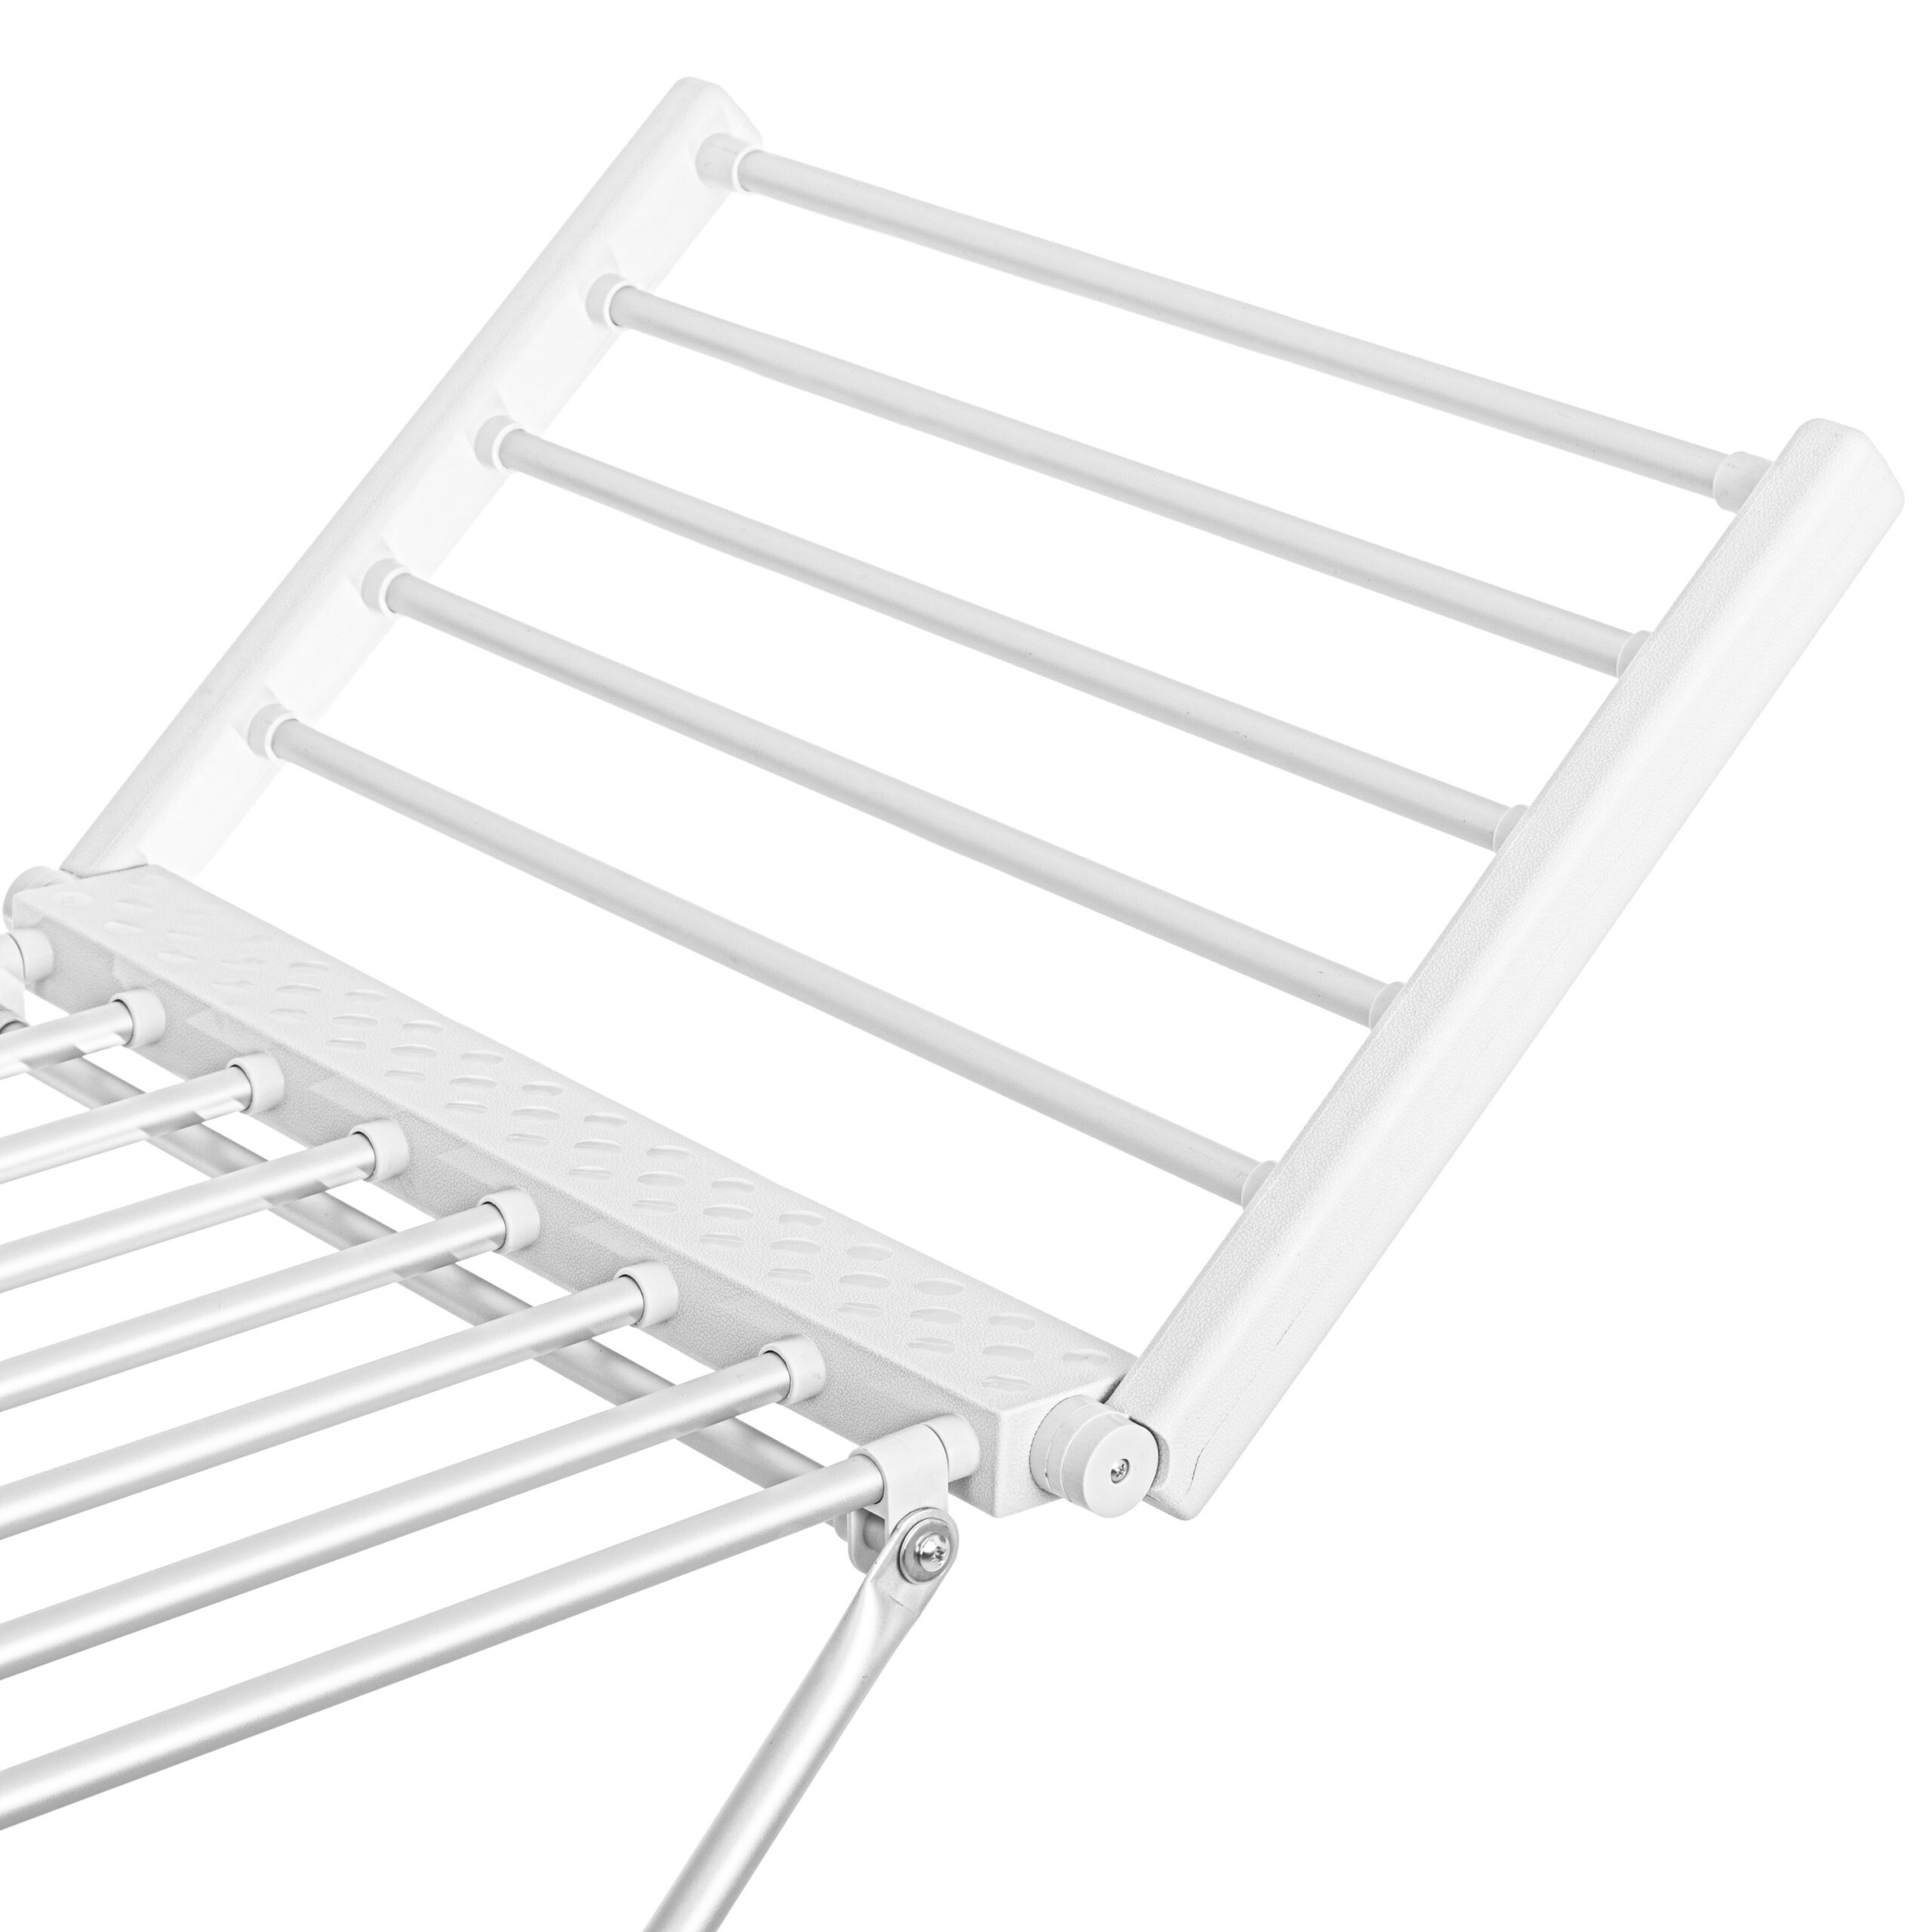 Electric Clothes Drying Rack, SKU: 518